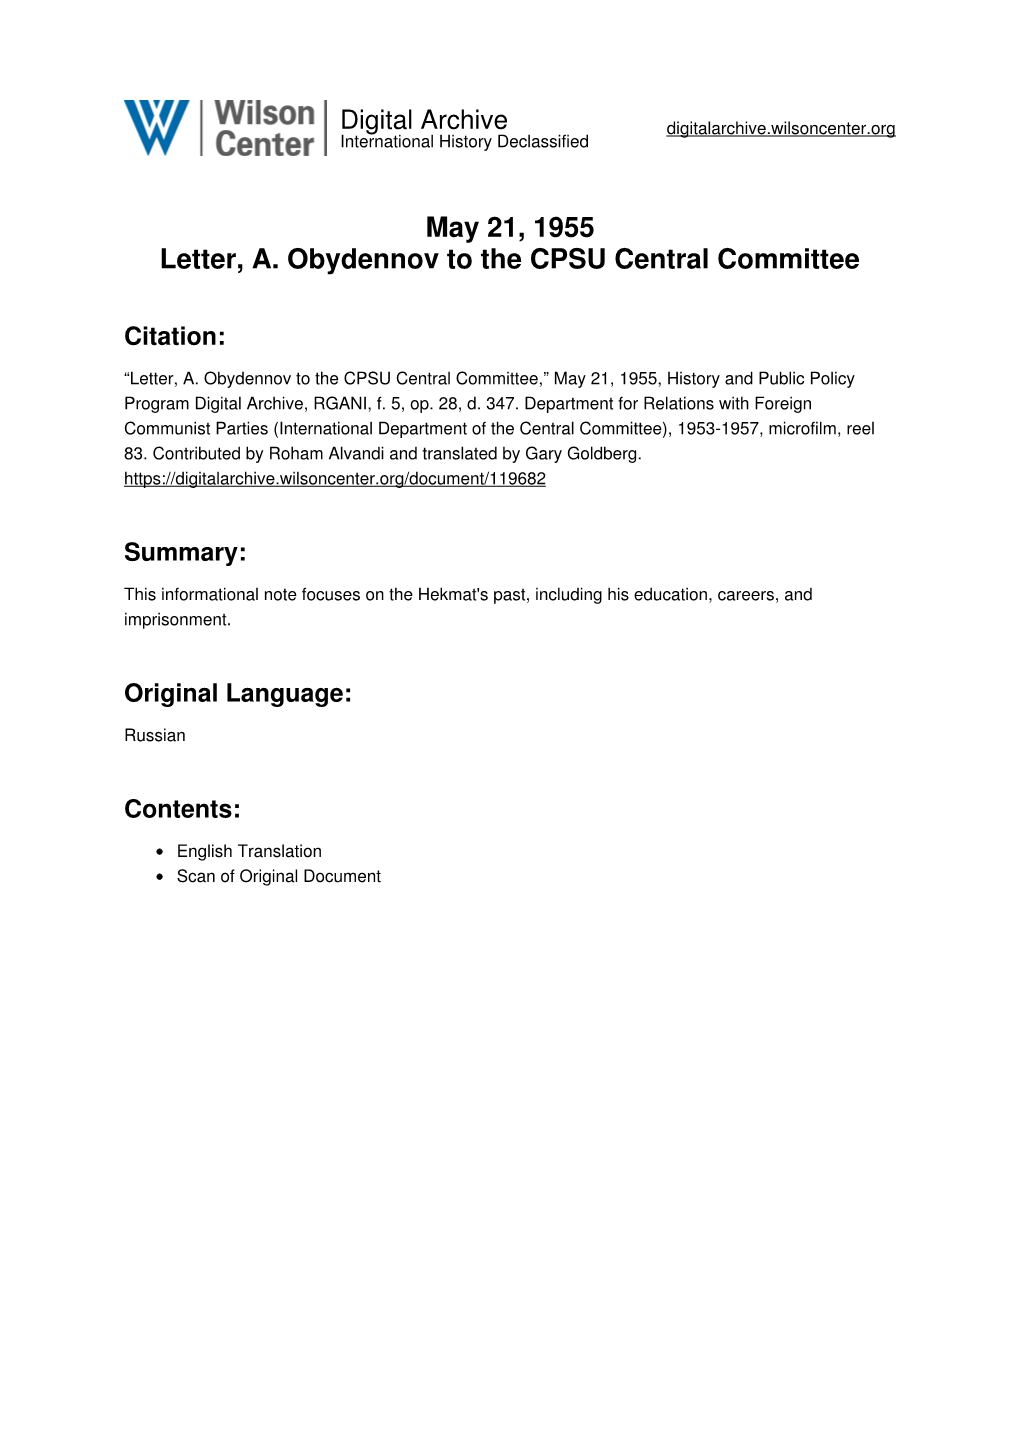 May 21, 1955 Letter, A. Obydennov to the CPSU Central Committee